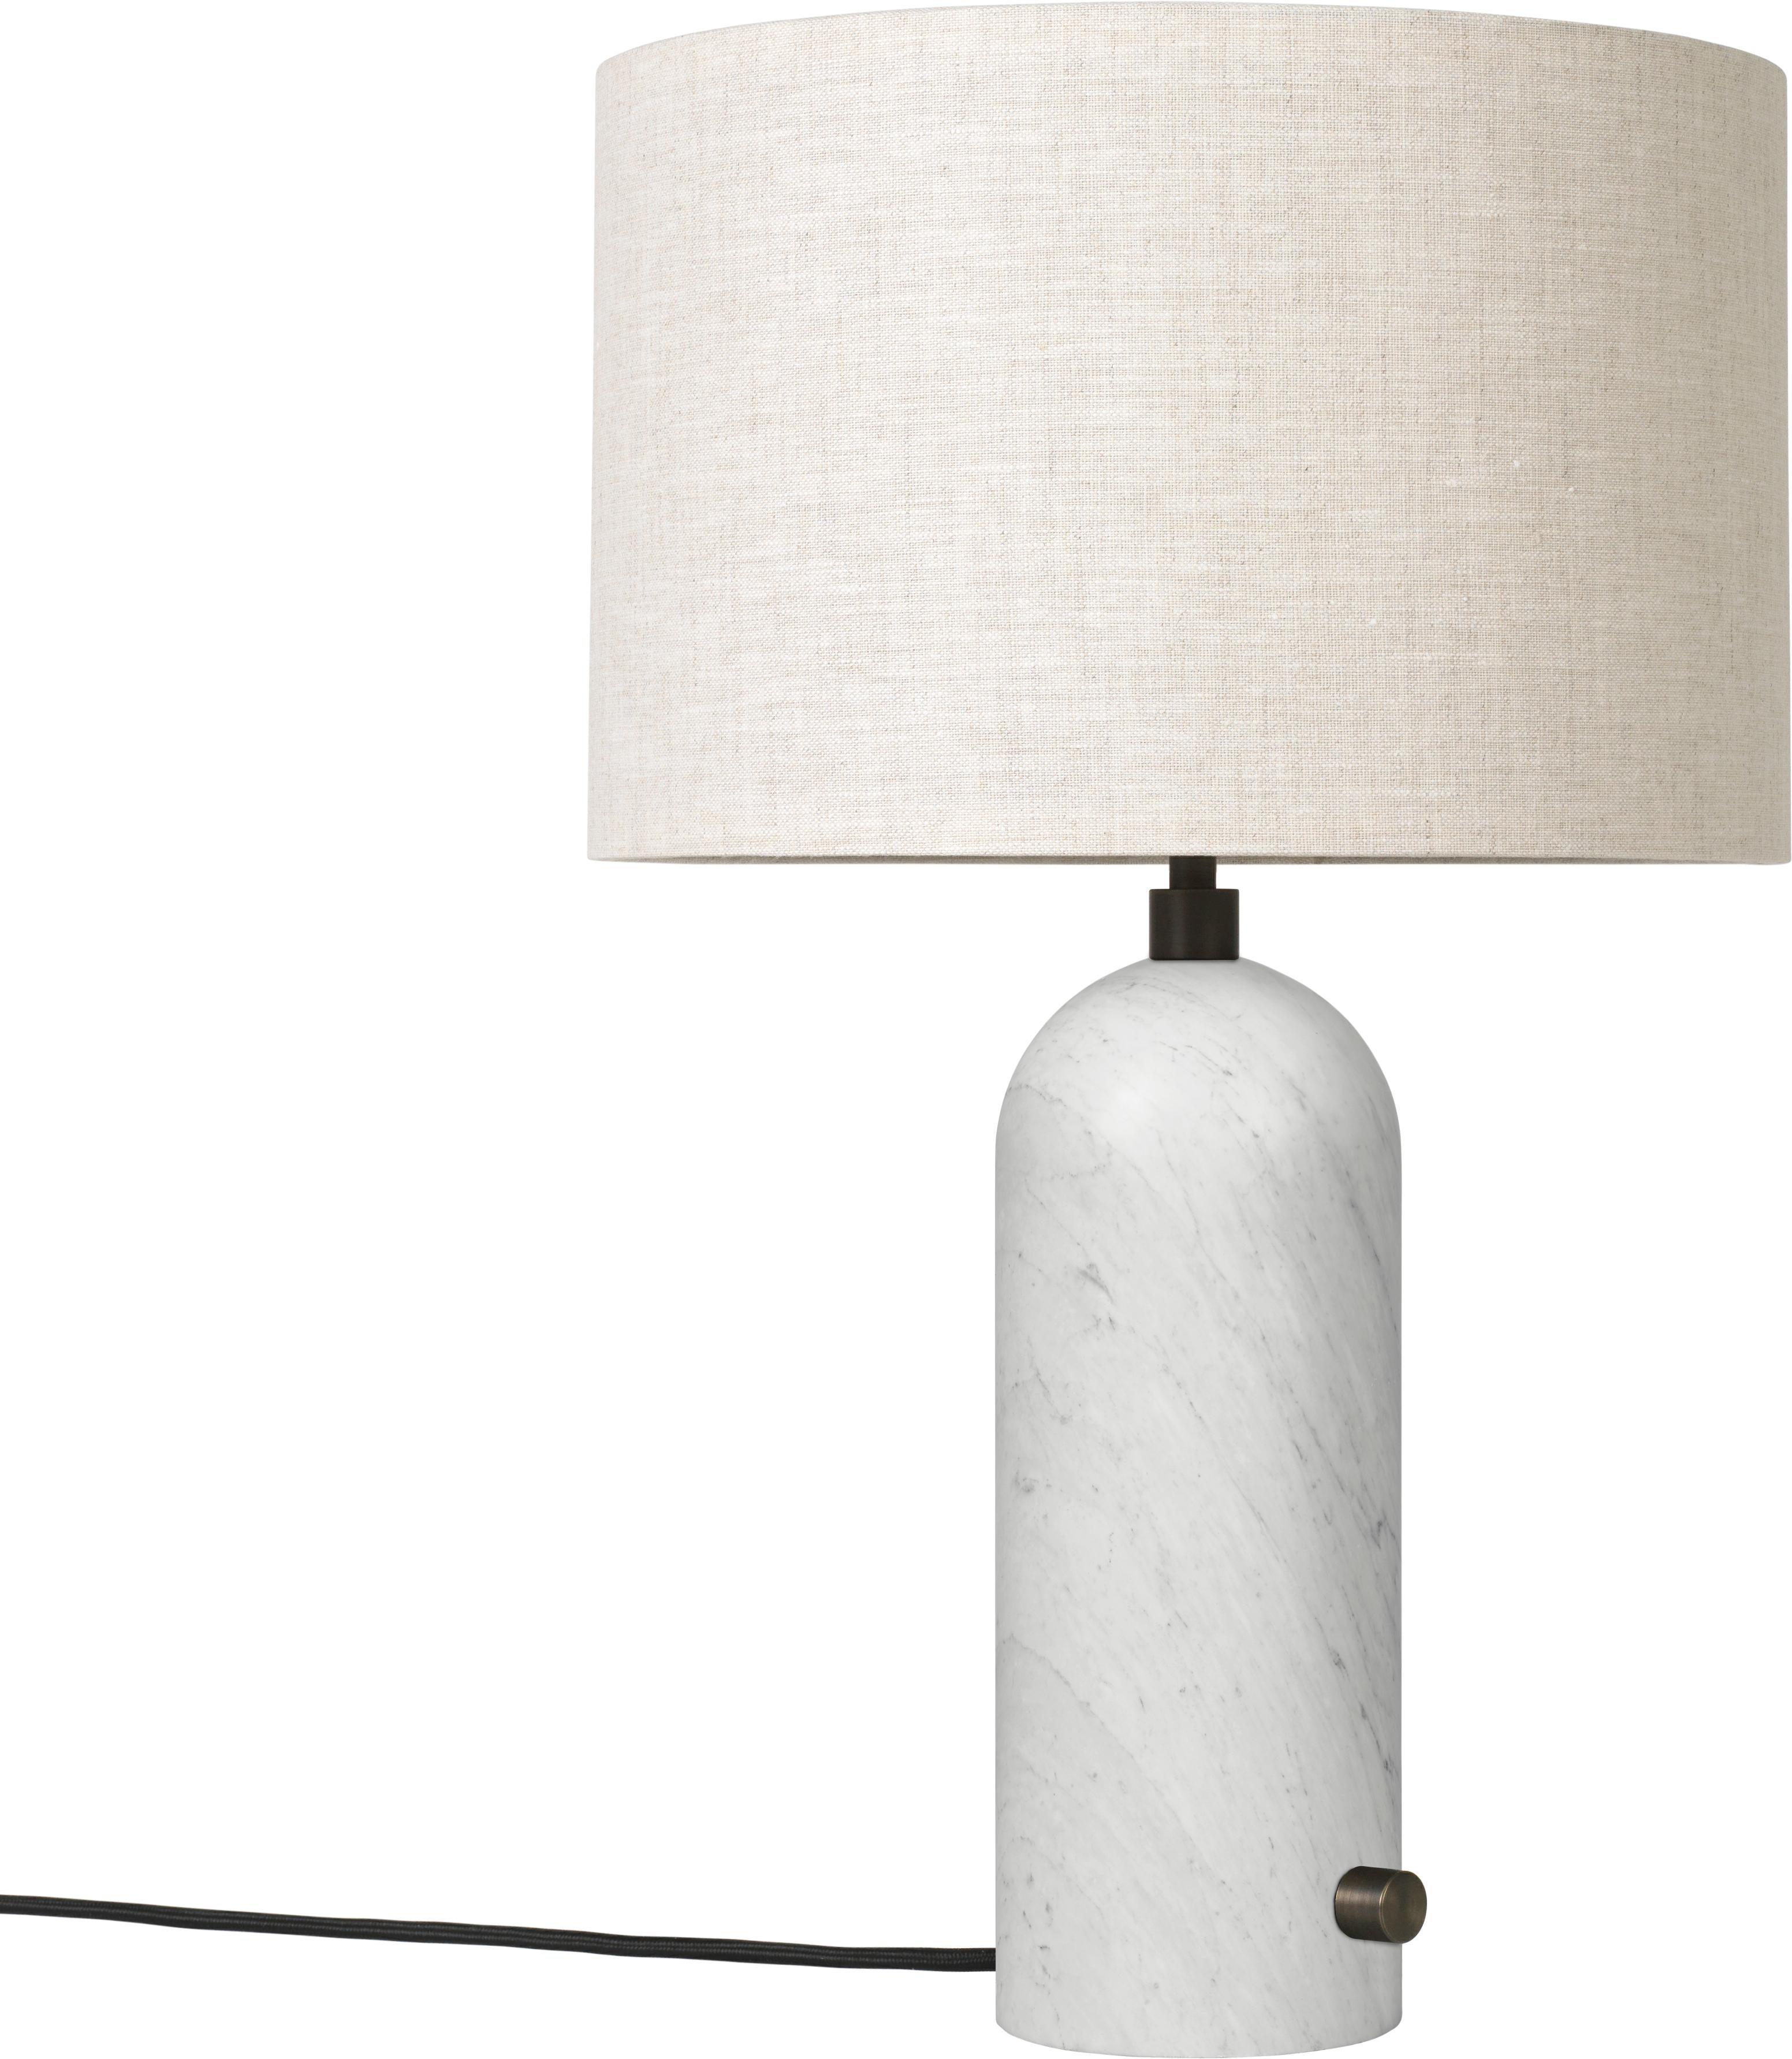 White Marble 'Gravity' table lamp by Space Copenhagen for Gubi. Executed in white marble with a canvass (or white textile) shade, antiqued brass dimmer in bass and black cloth cord. Taking its name from the lamp’s distinctive balance between the